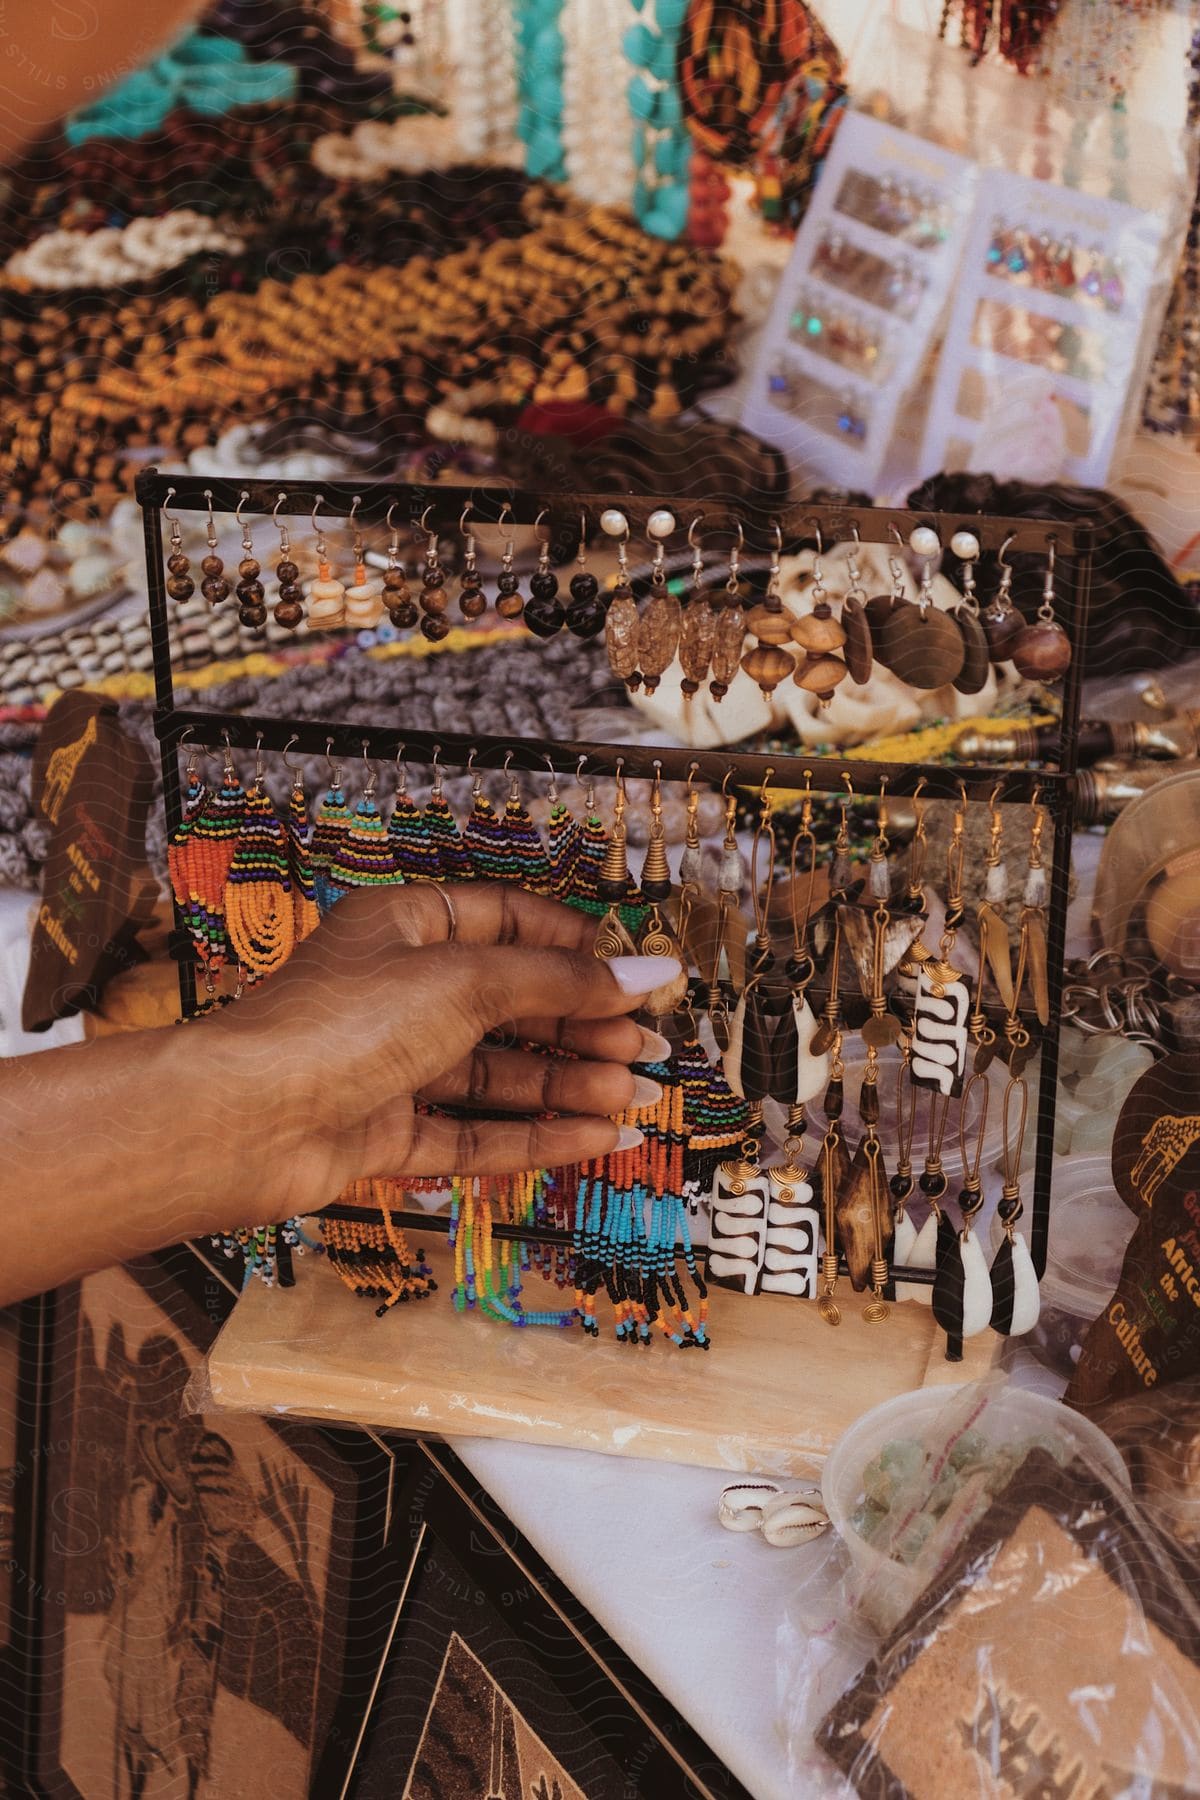 A person's hand touching Native American style jewelry at a store